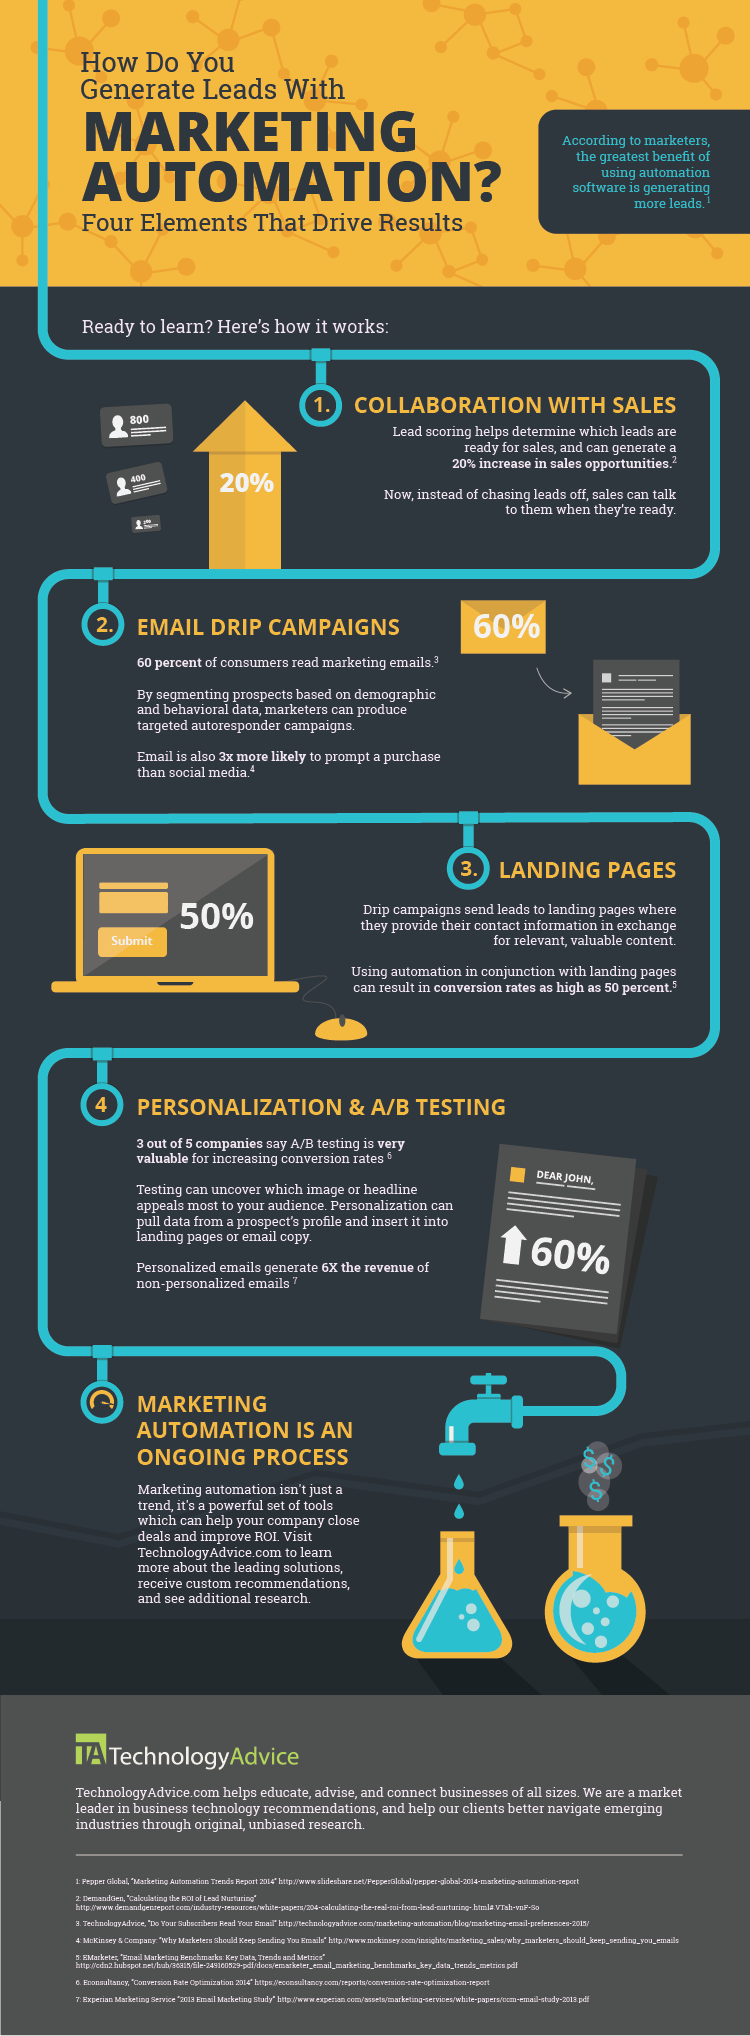 4 Ways to Generate Leads Using Marketing Automation (Infographic)